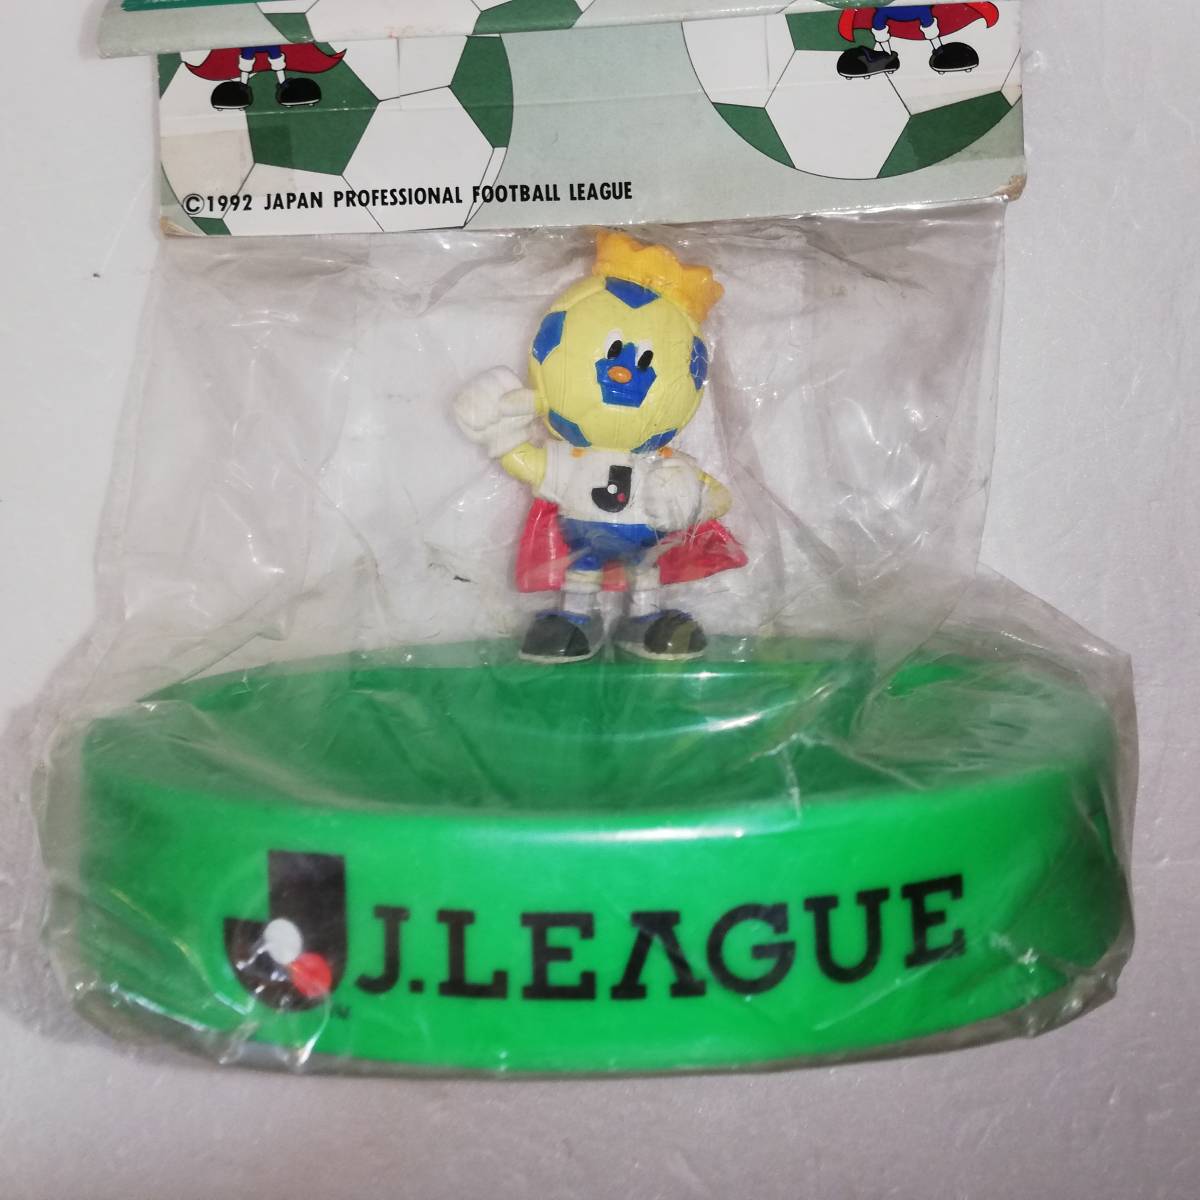 *J.LEAGUE after sports gear *1996 year Sega made gift for *J Lee g